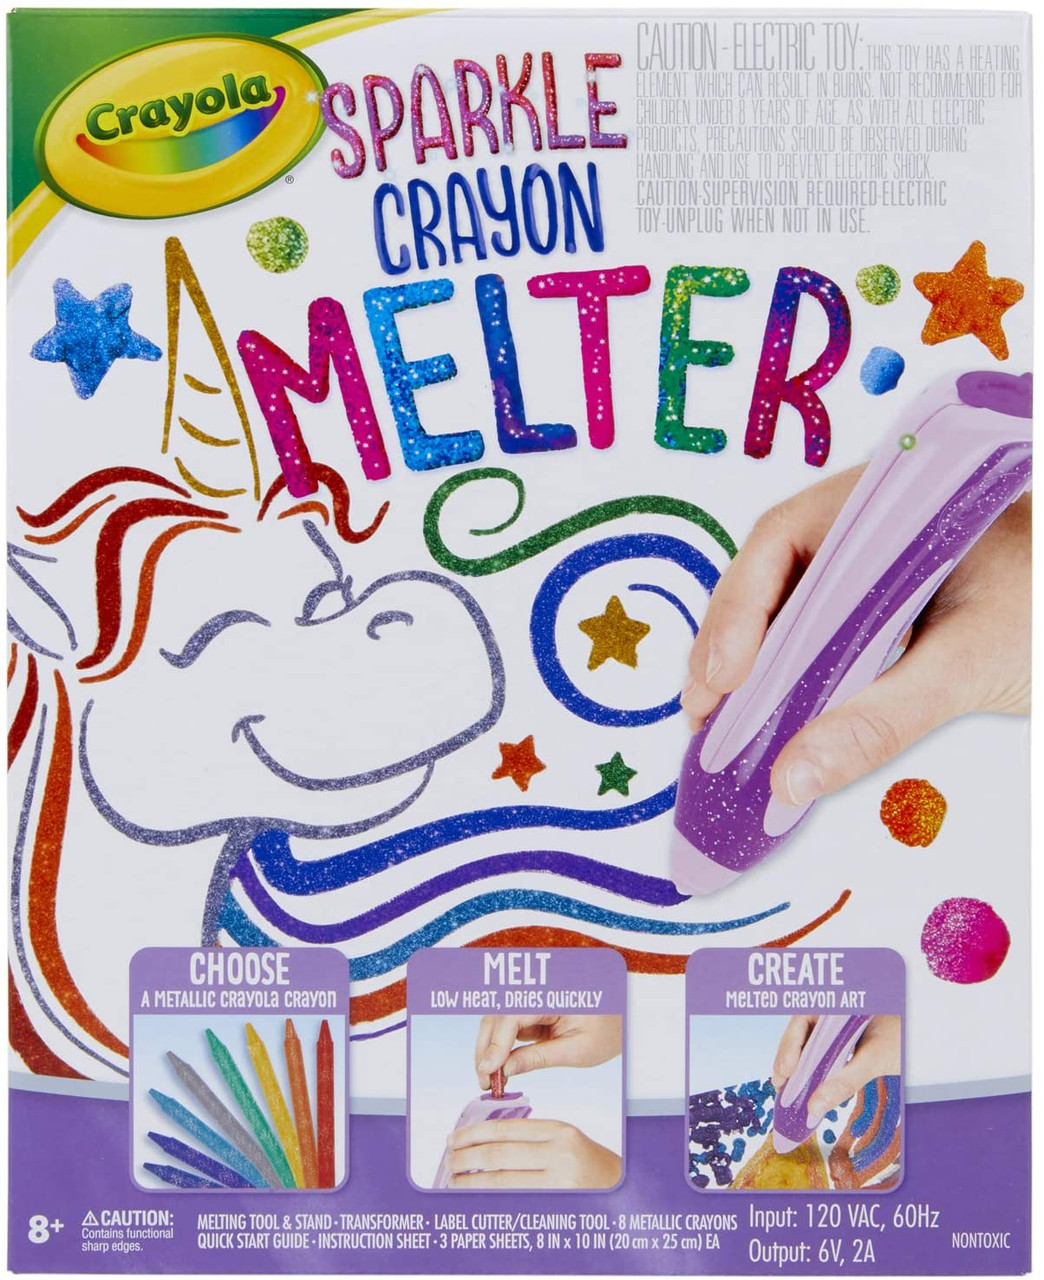 Crayola's New Pen Writes On Any Surface Using Melted Crayons As Ink